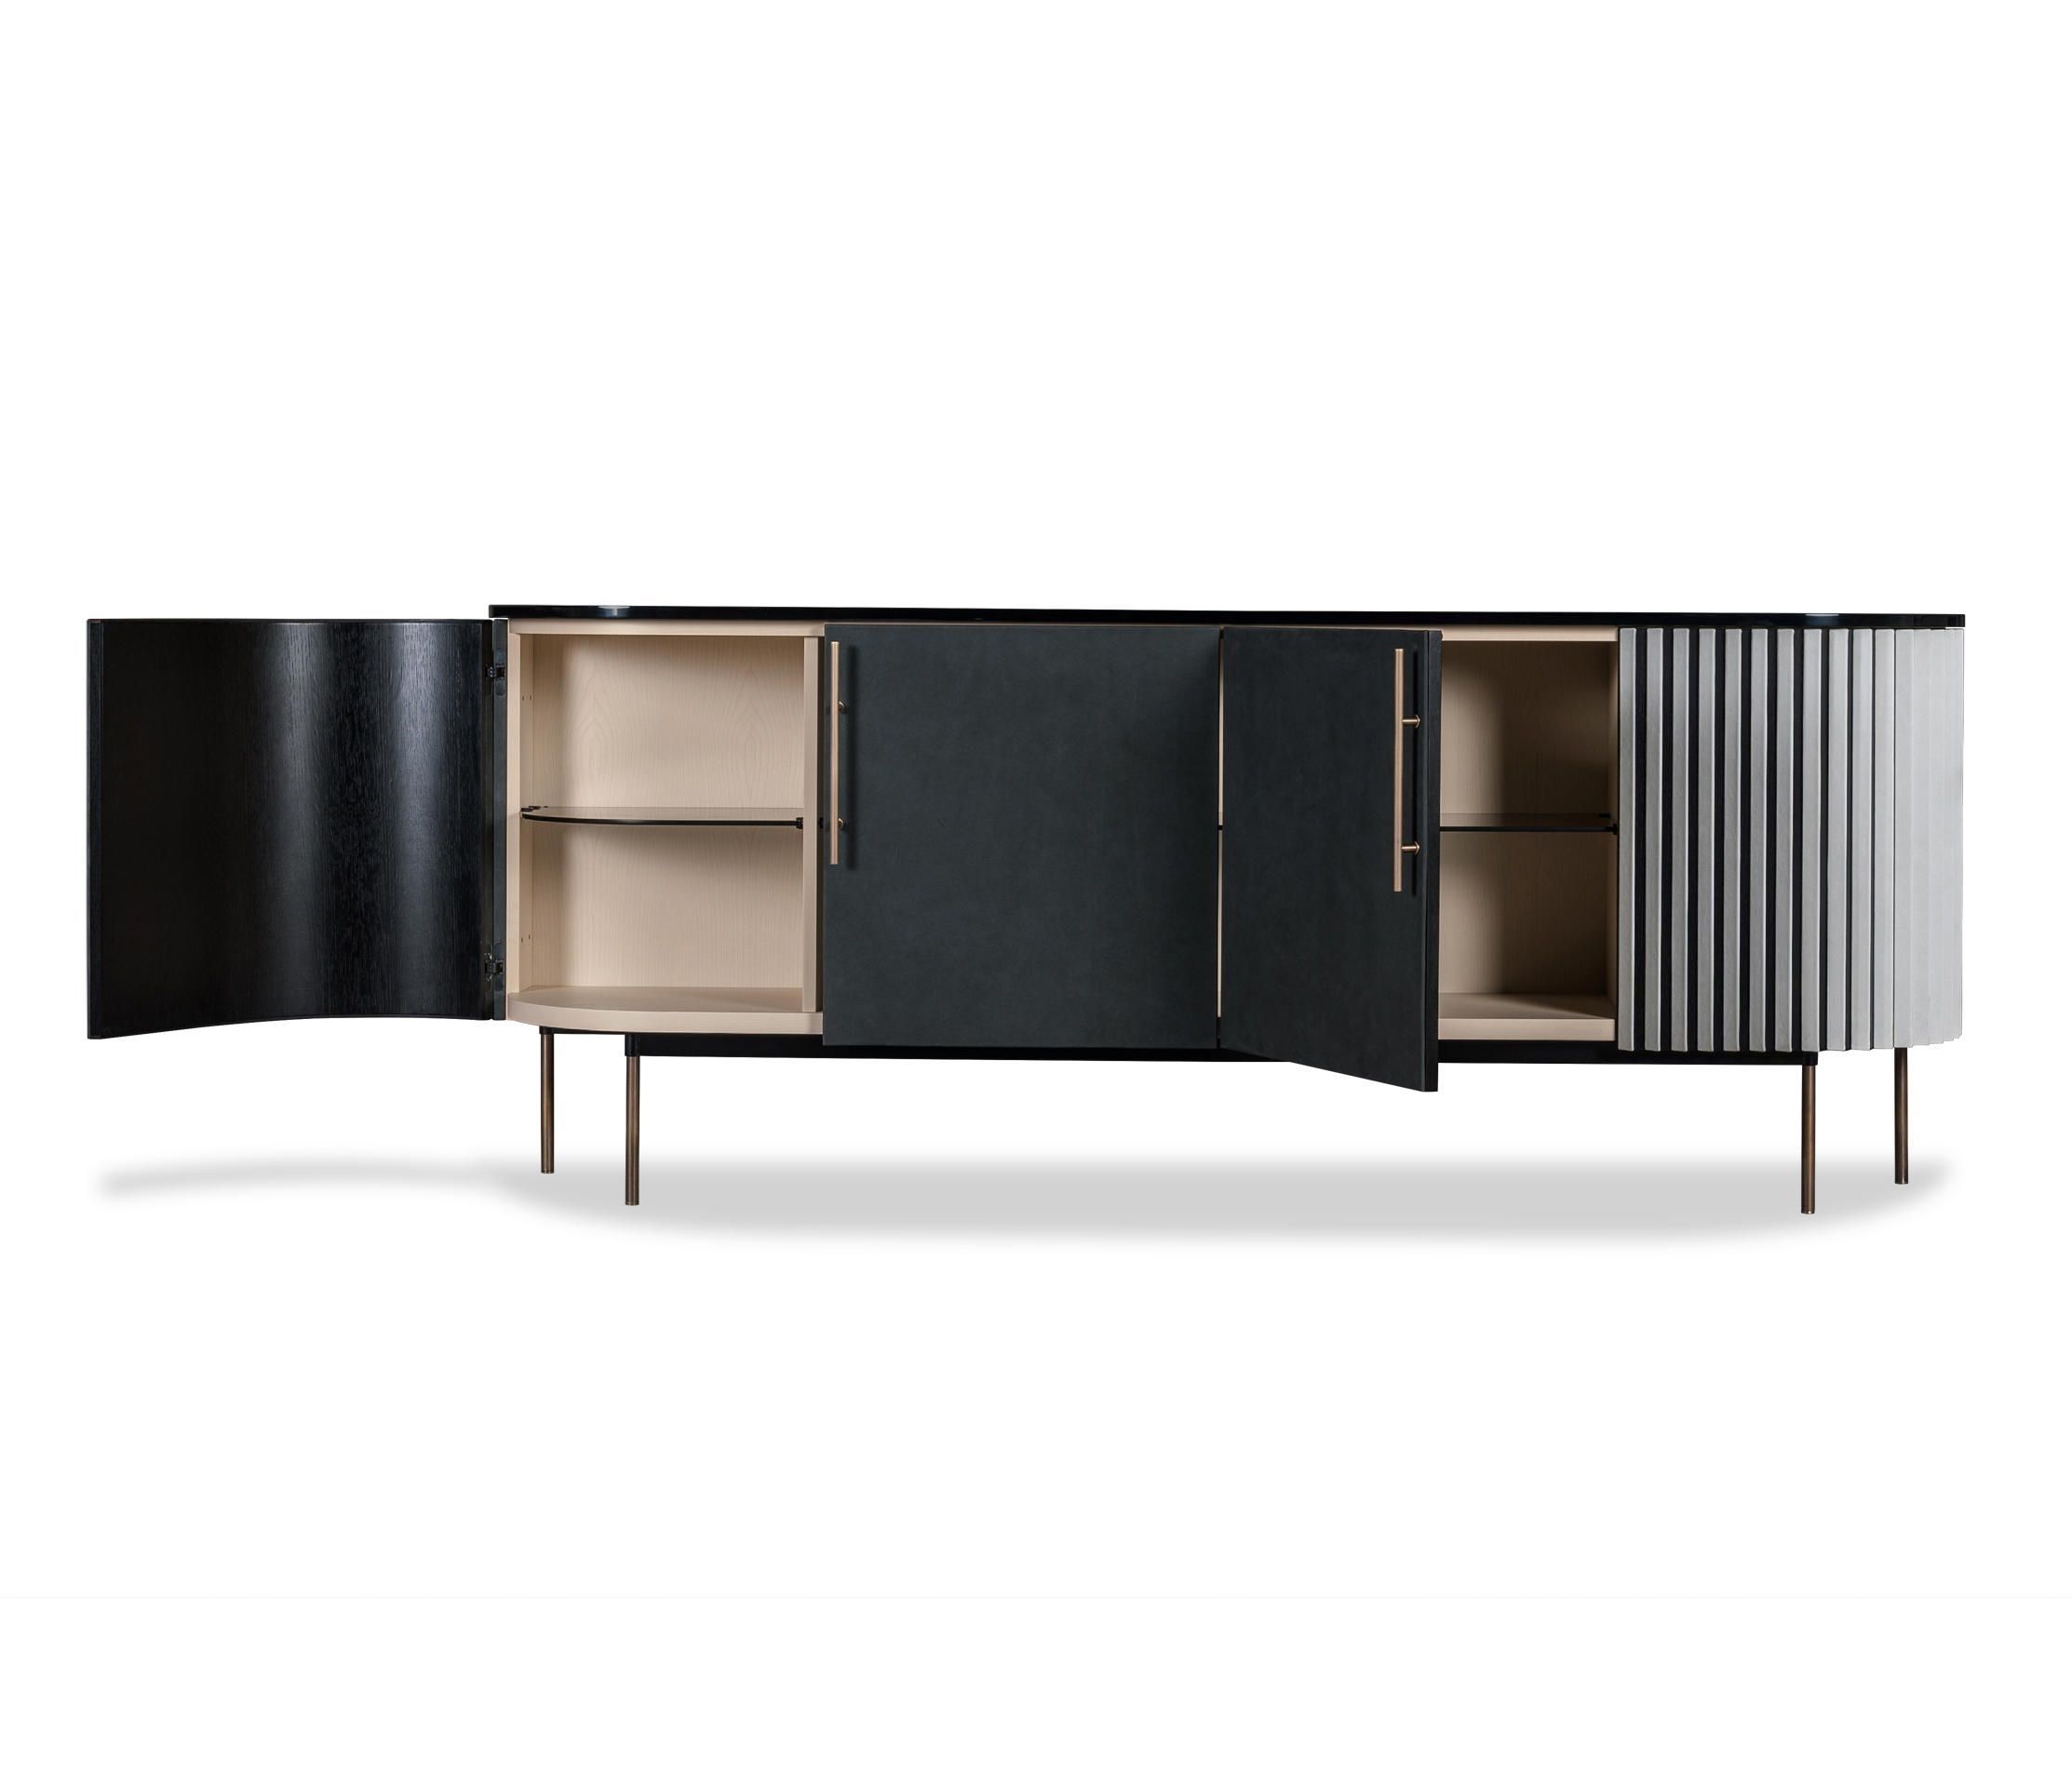 Plissé Low Cabinetbaxter | Sideboards | Furniture Cabinet Low Pertaining To Rani 4 Door Sideboards (View 11 of 30)